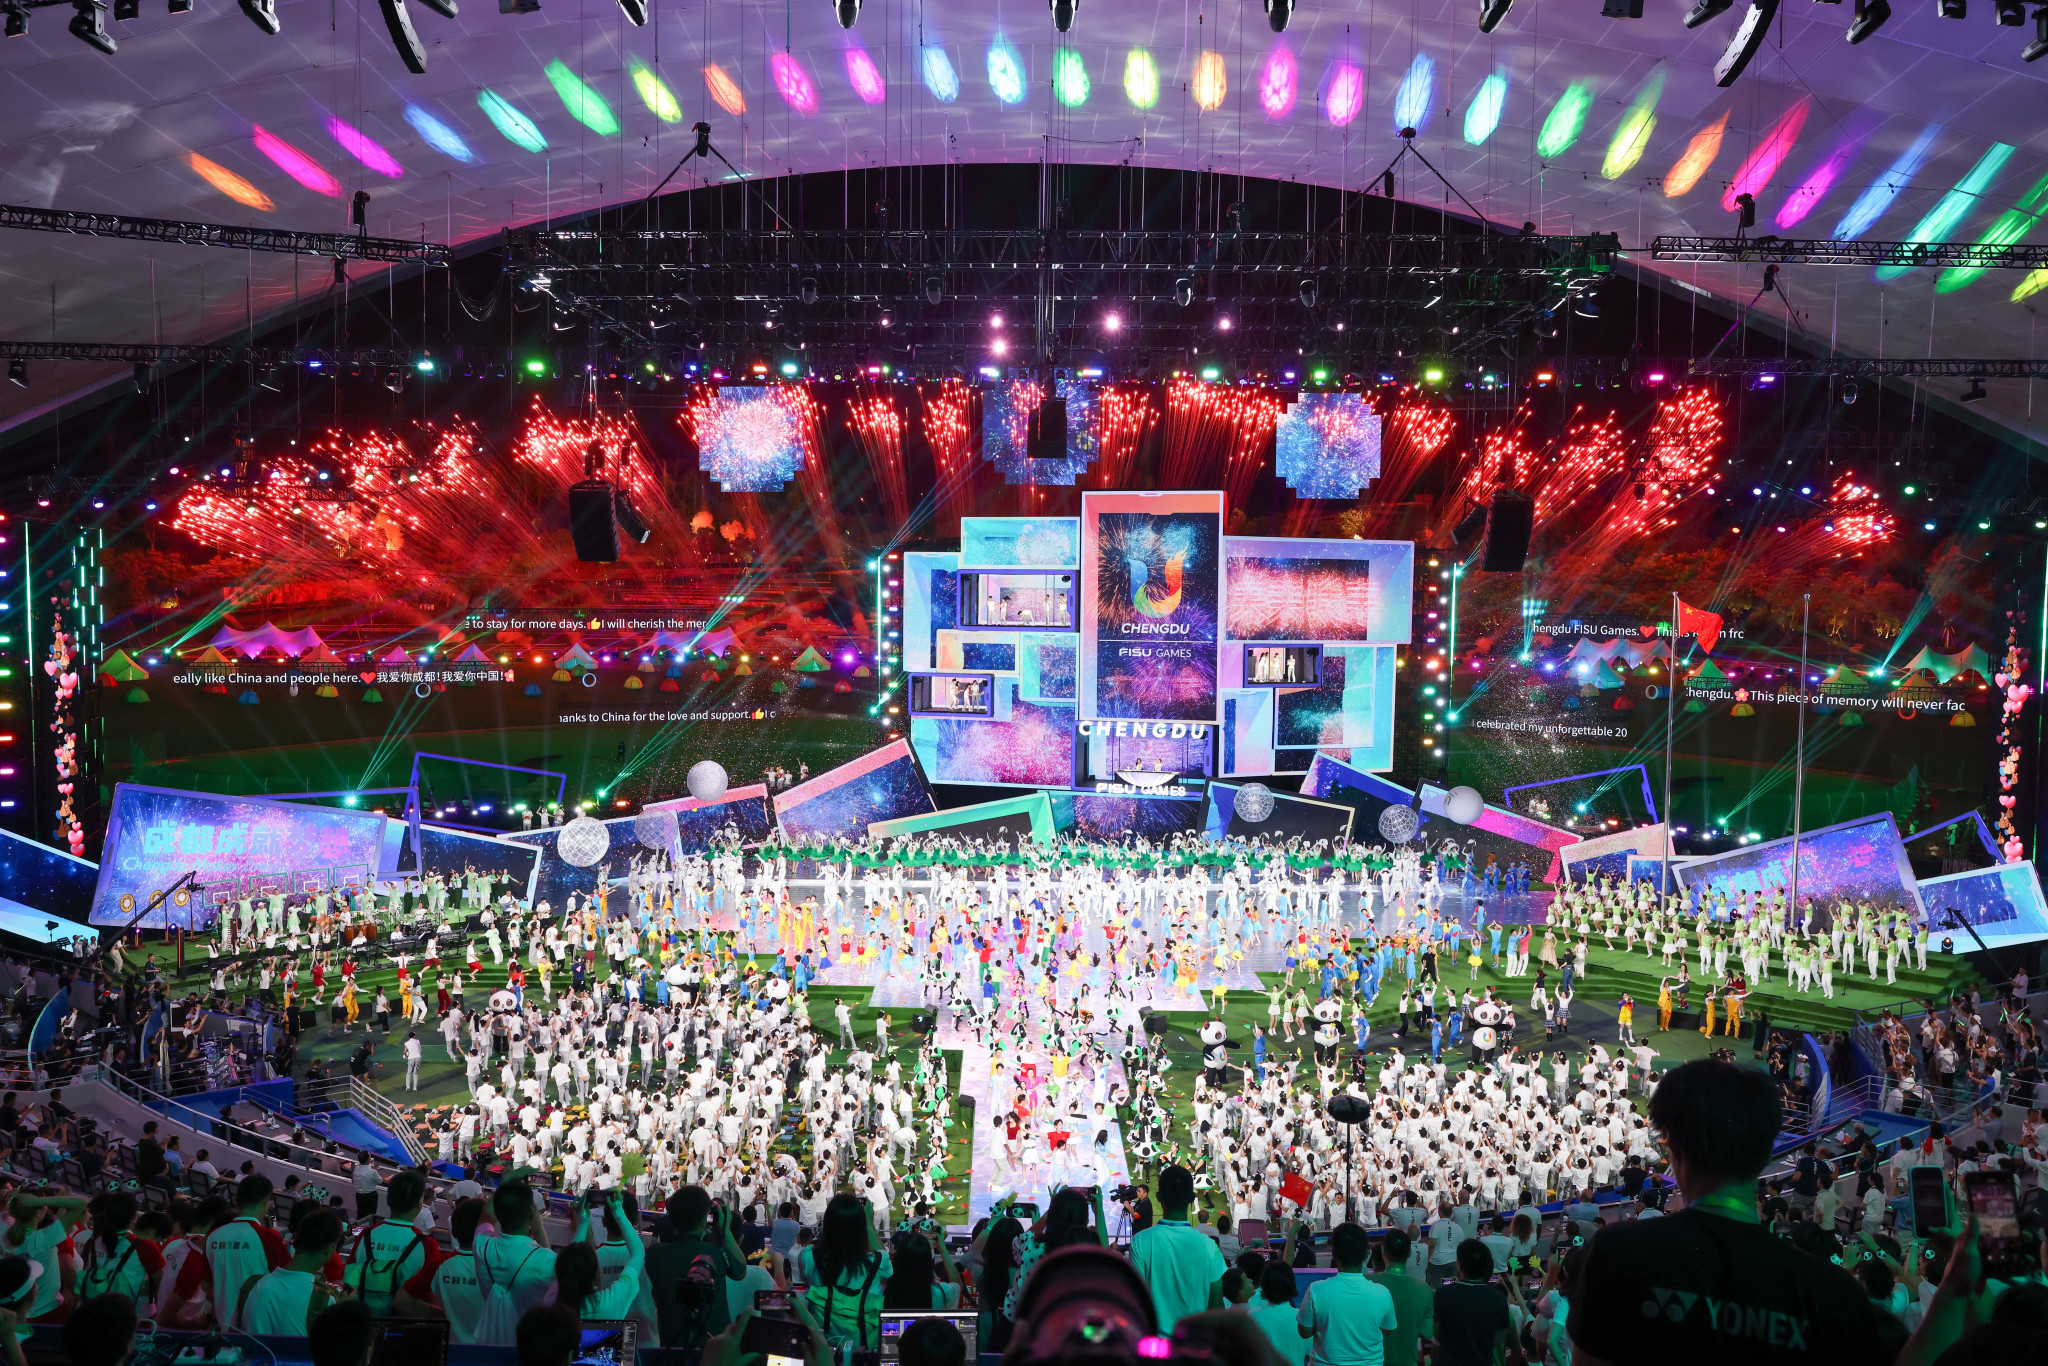 Chengdu 2021 ended with a spectacular Closing Ceremony ©Chengdu 2021